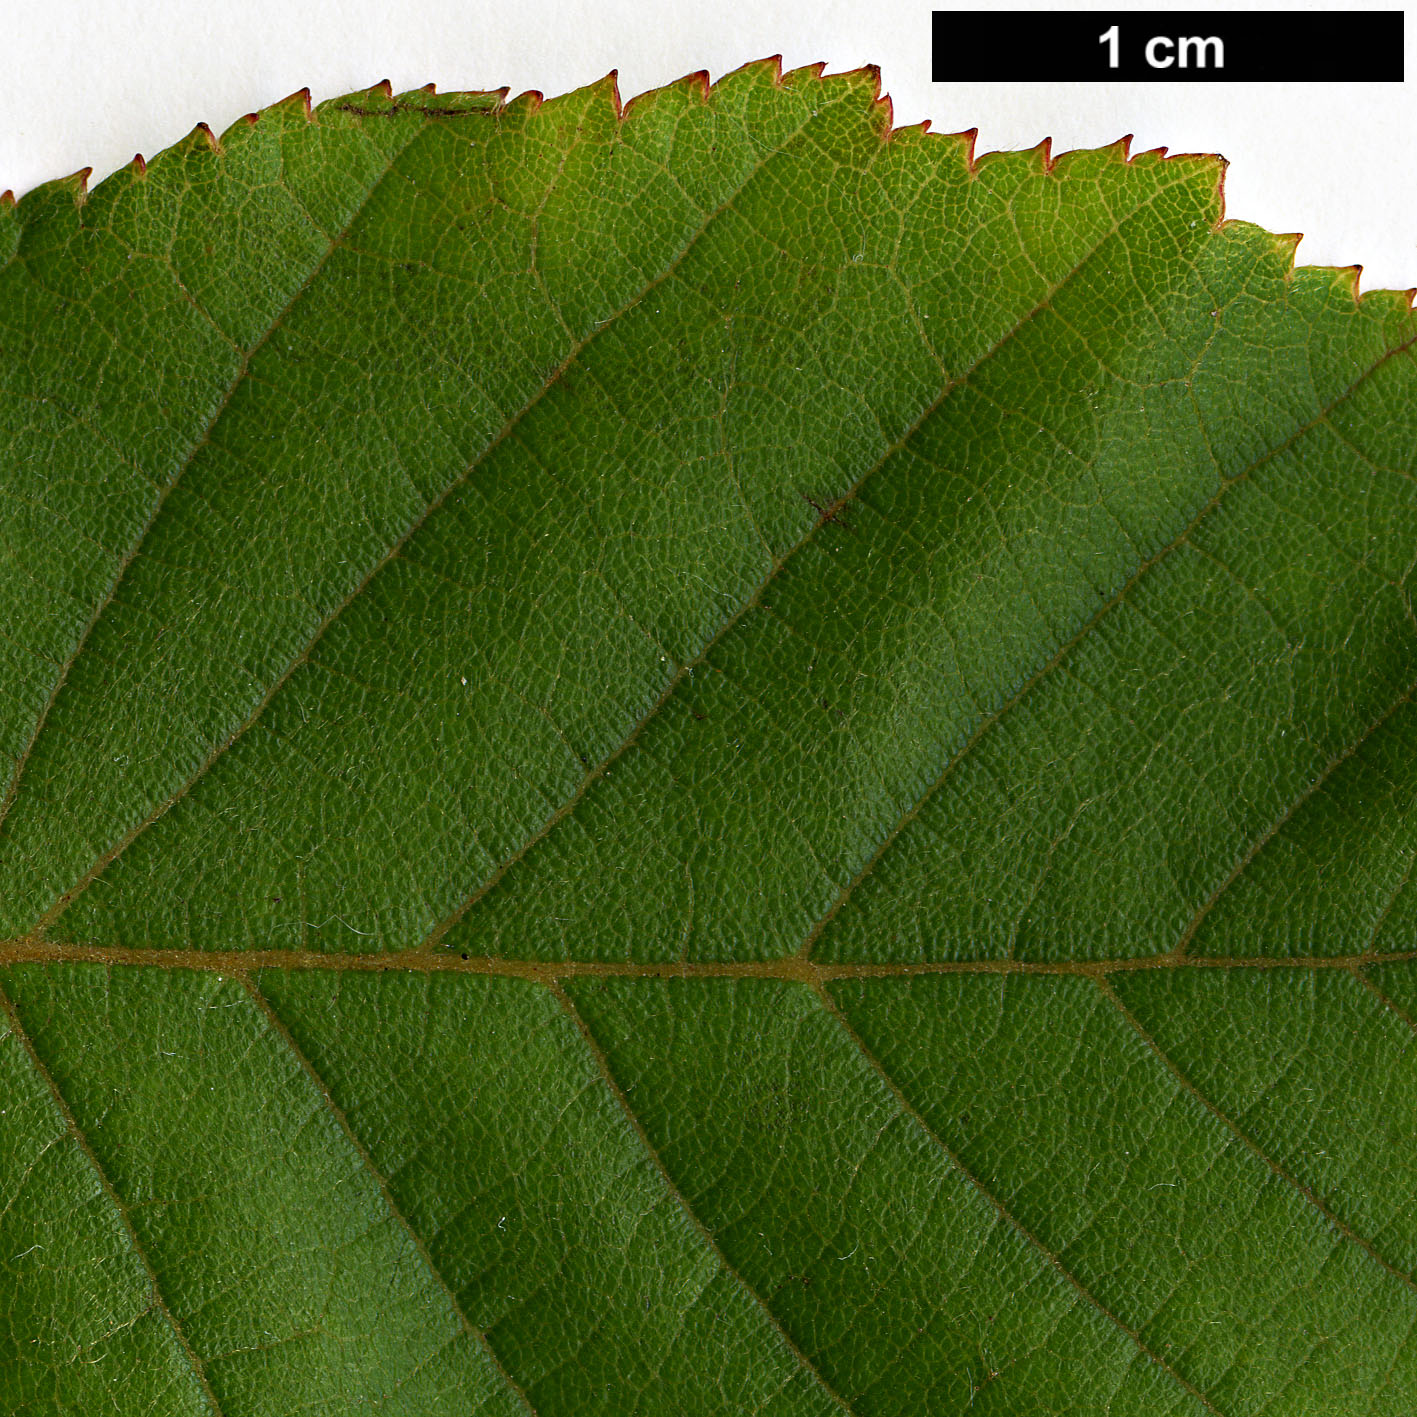 High resolution image: Family: Betulaceae - Genus: Betula - Taxon: cylindrostachya